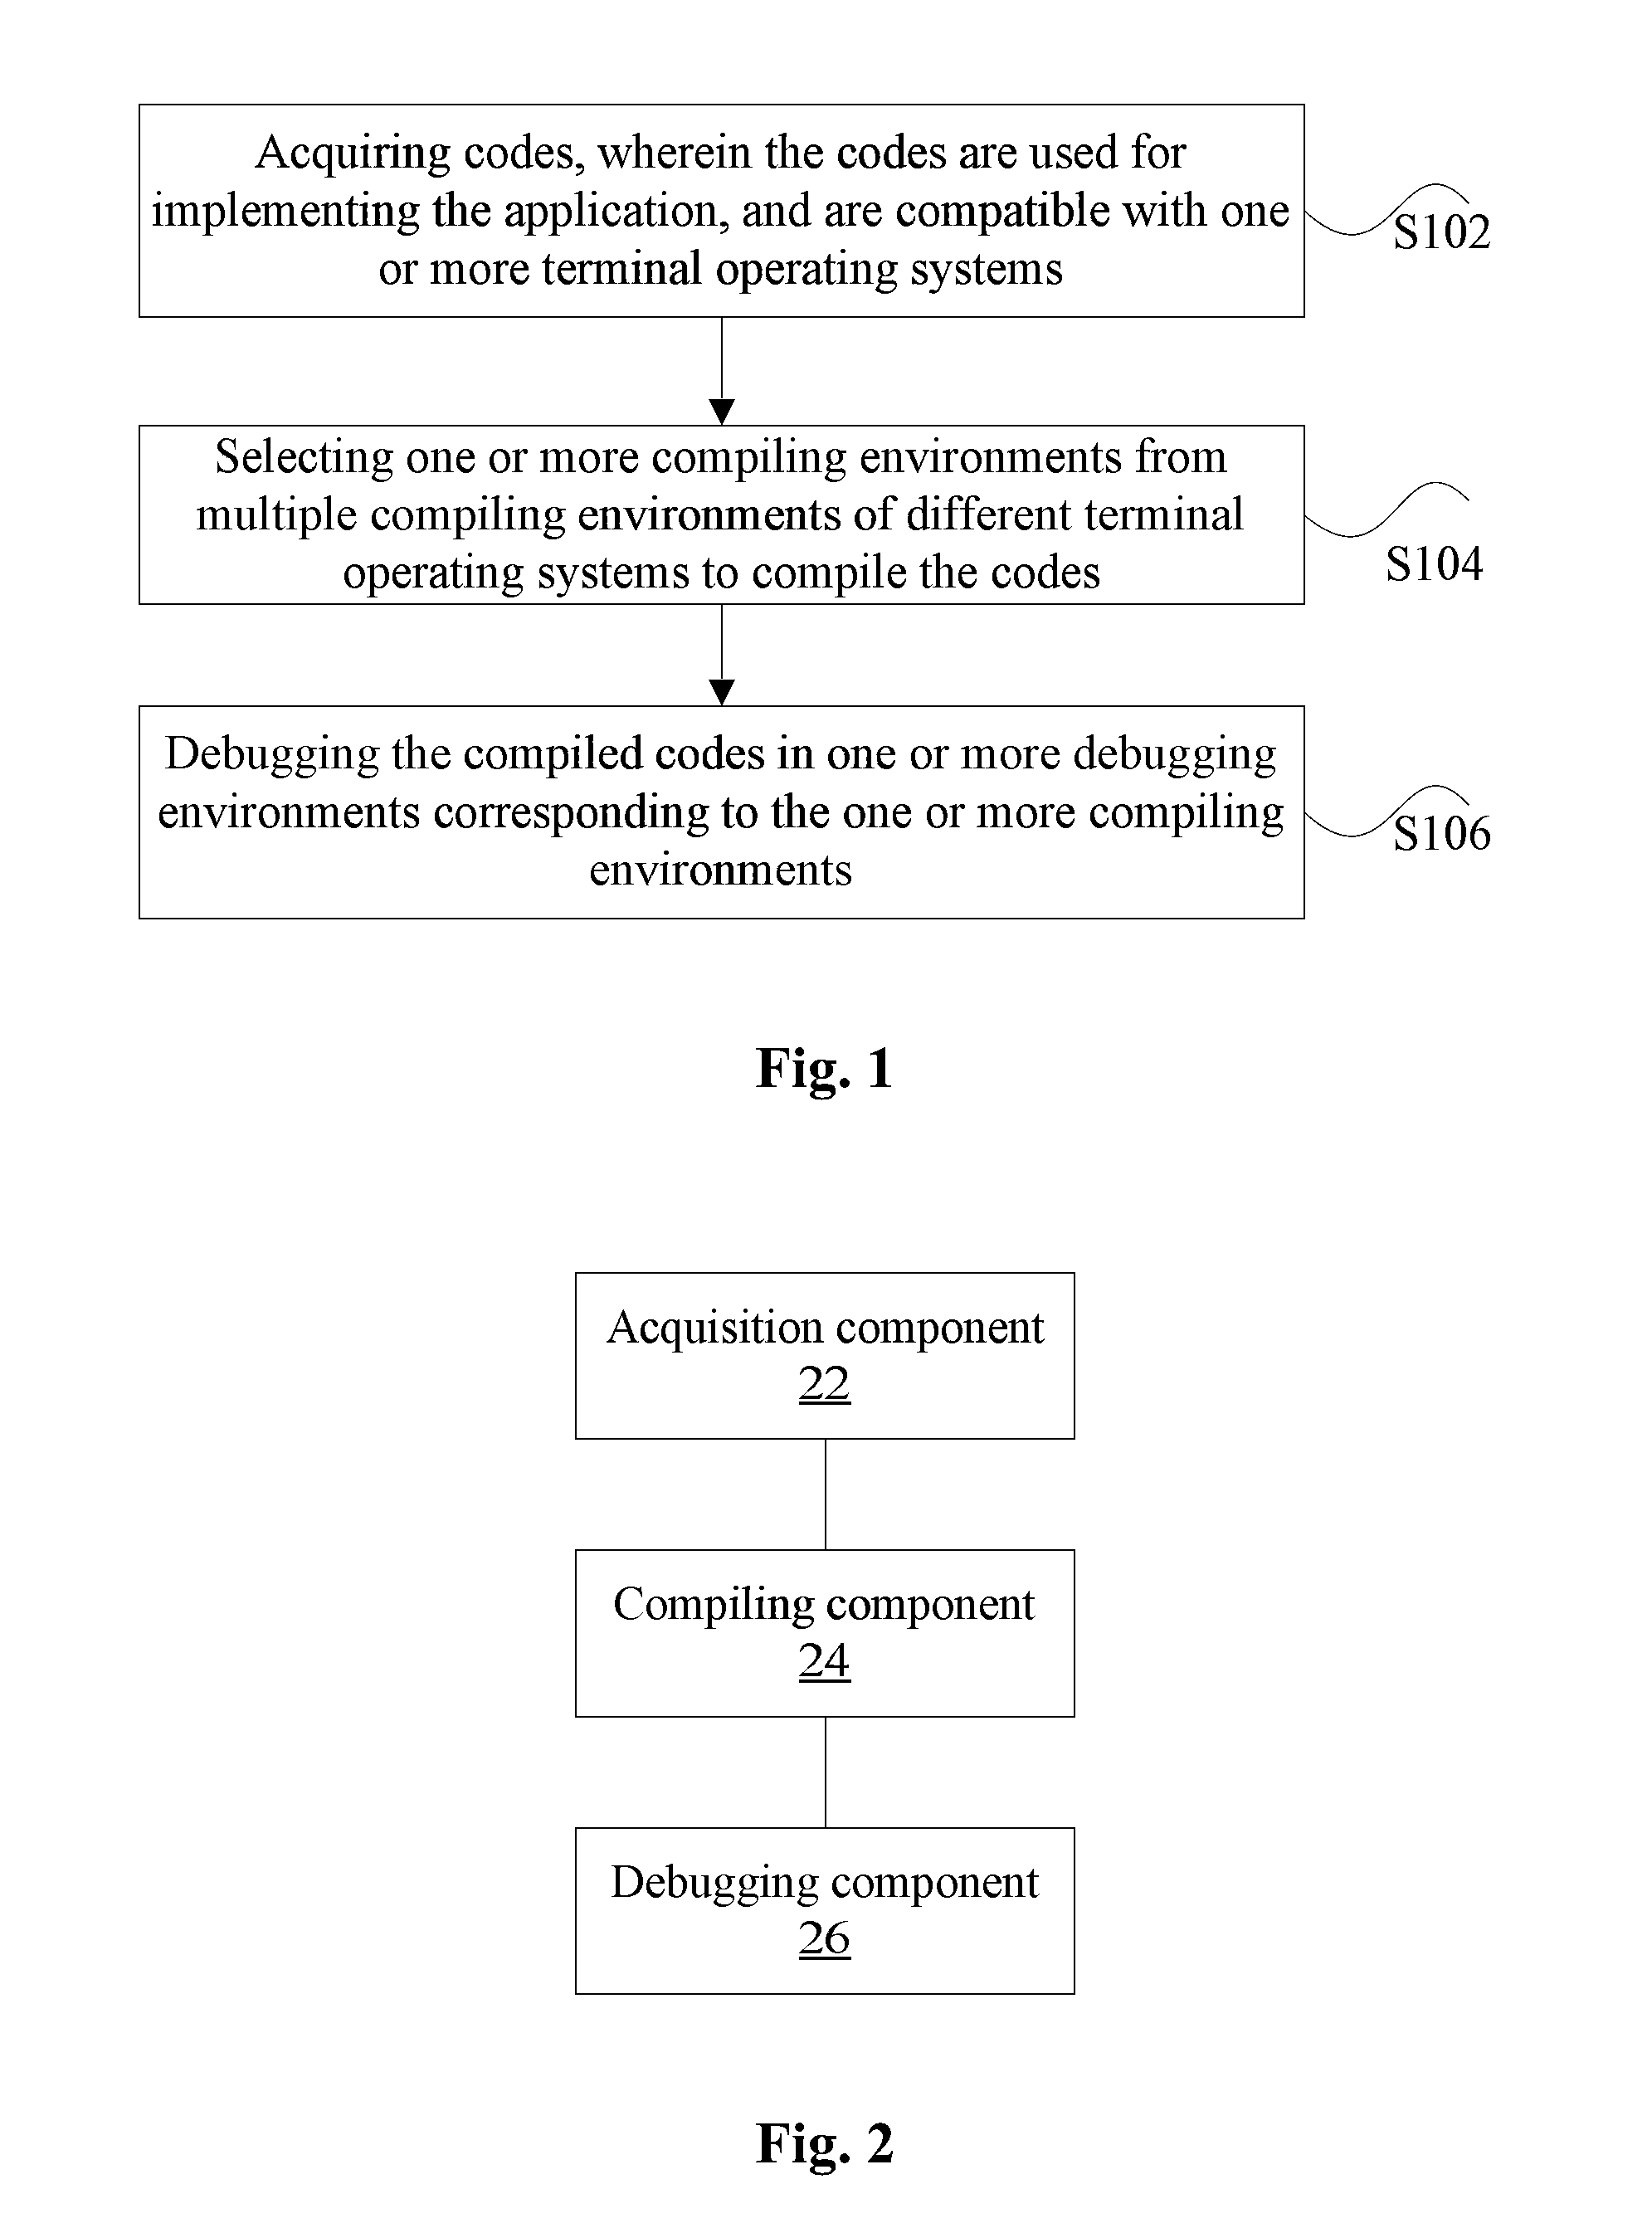 Method and device for developing, compiling and debugging